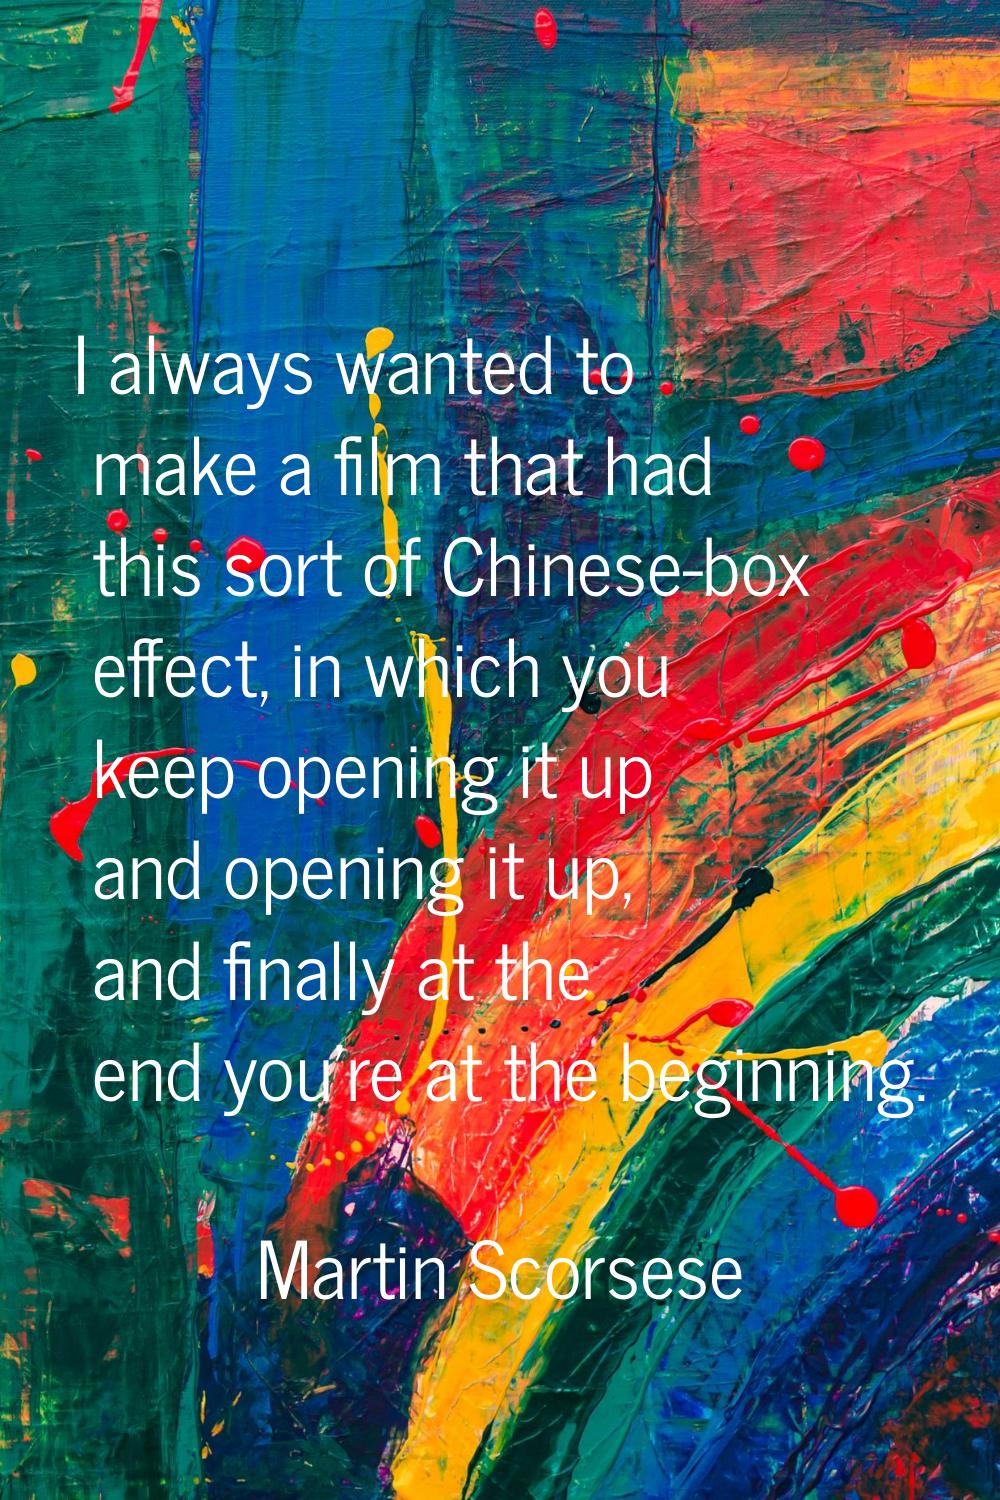 I always wanted to make a film that had this sort of Chinese-box effect, in which you keep opening 